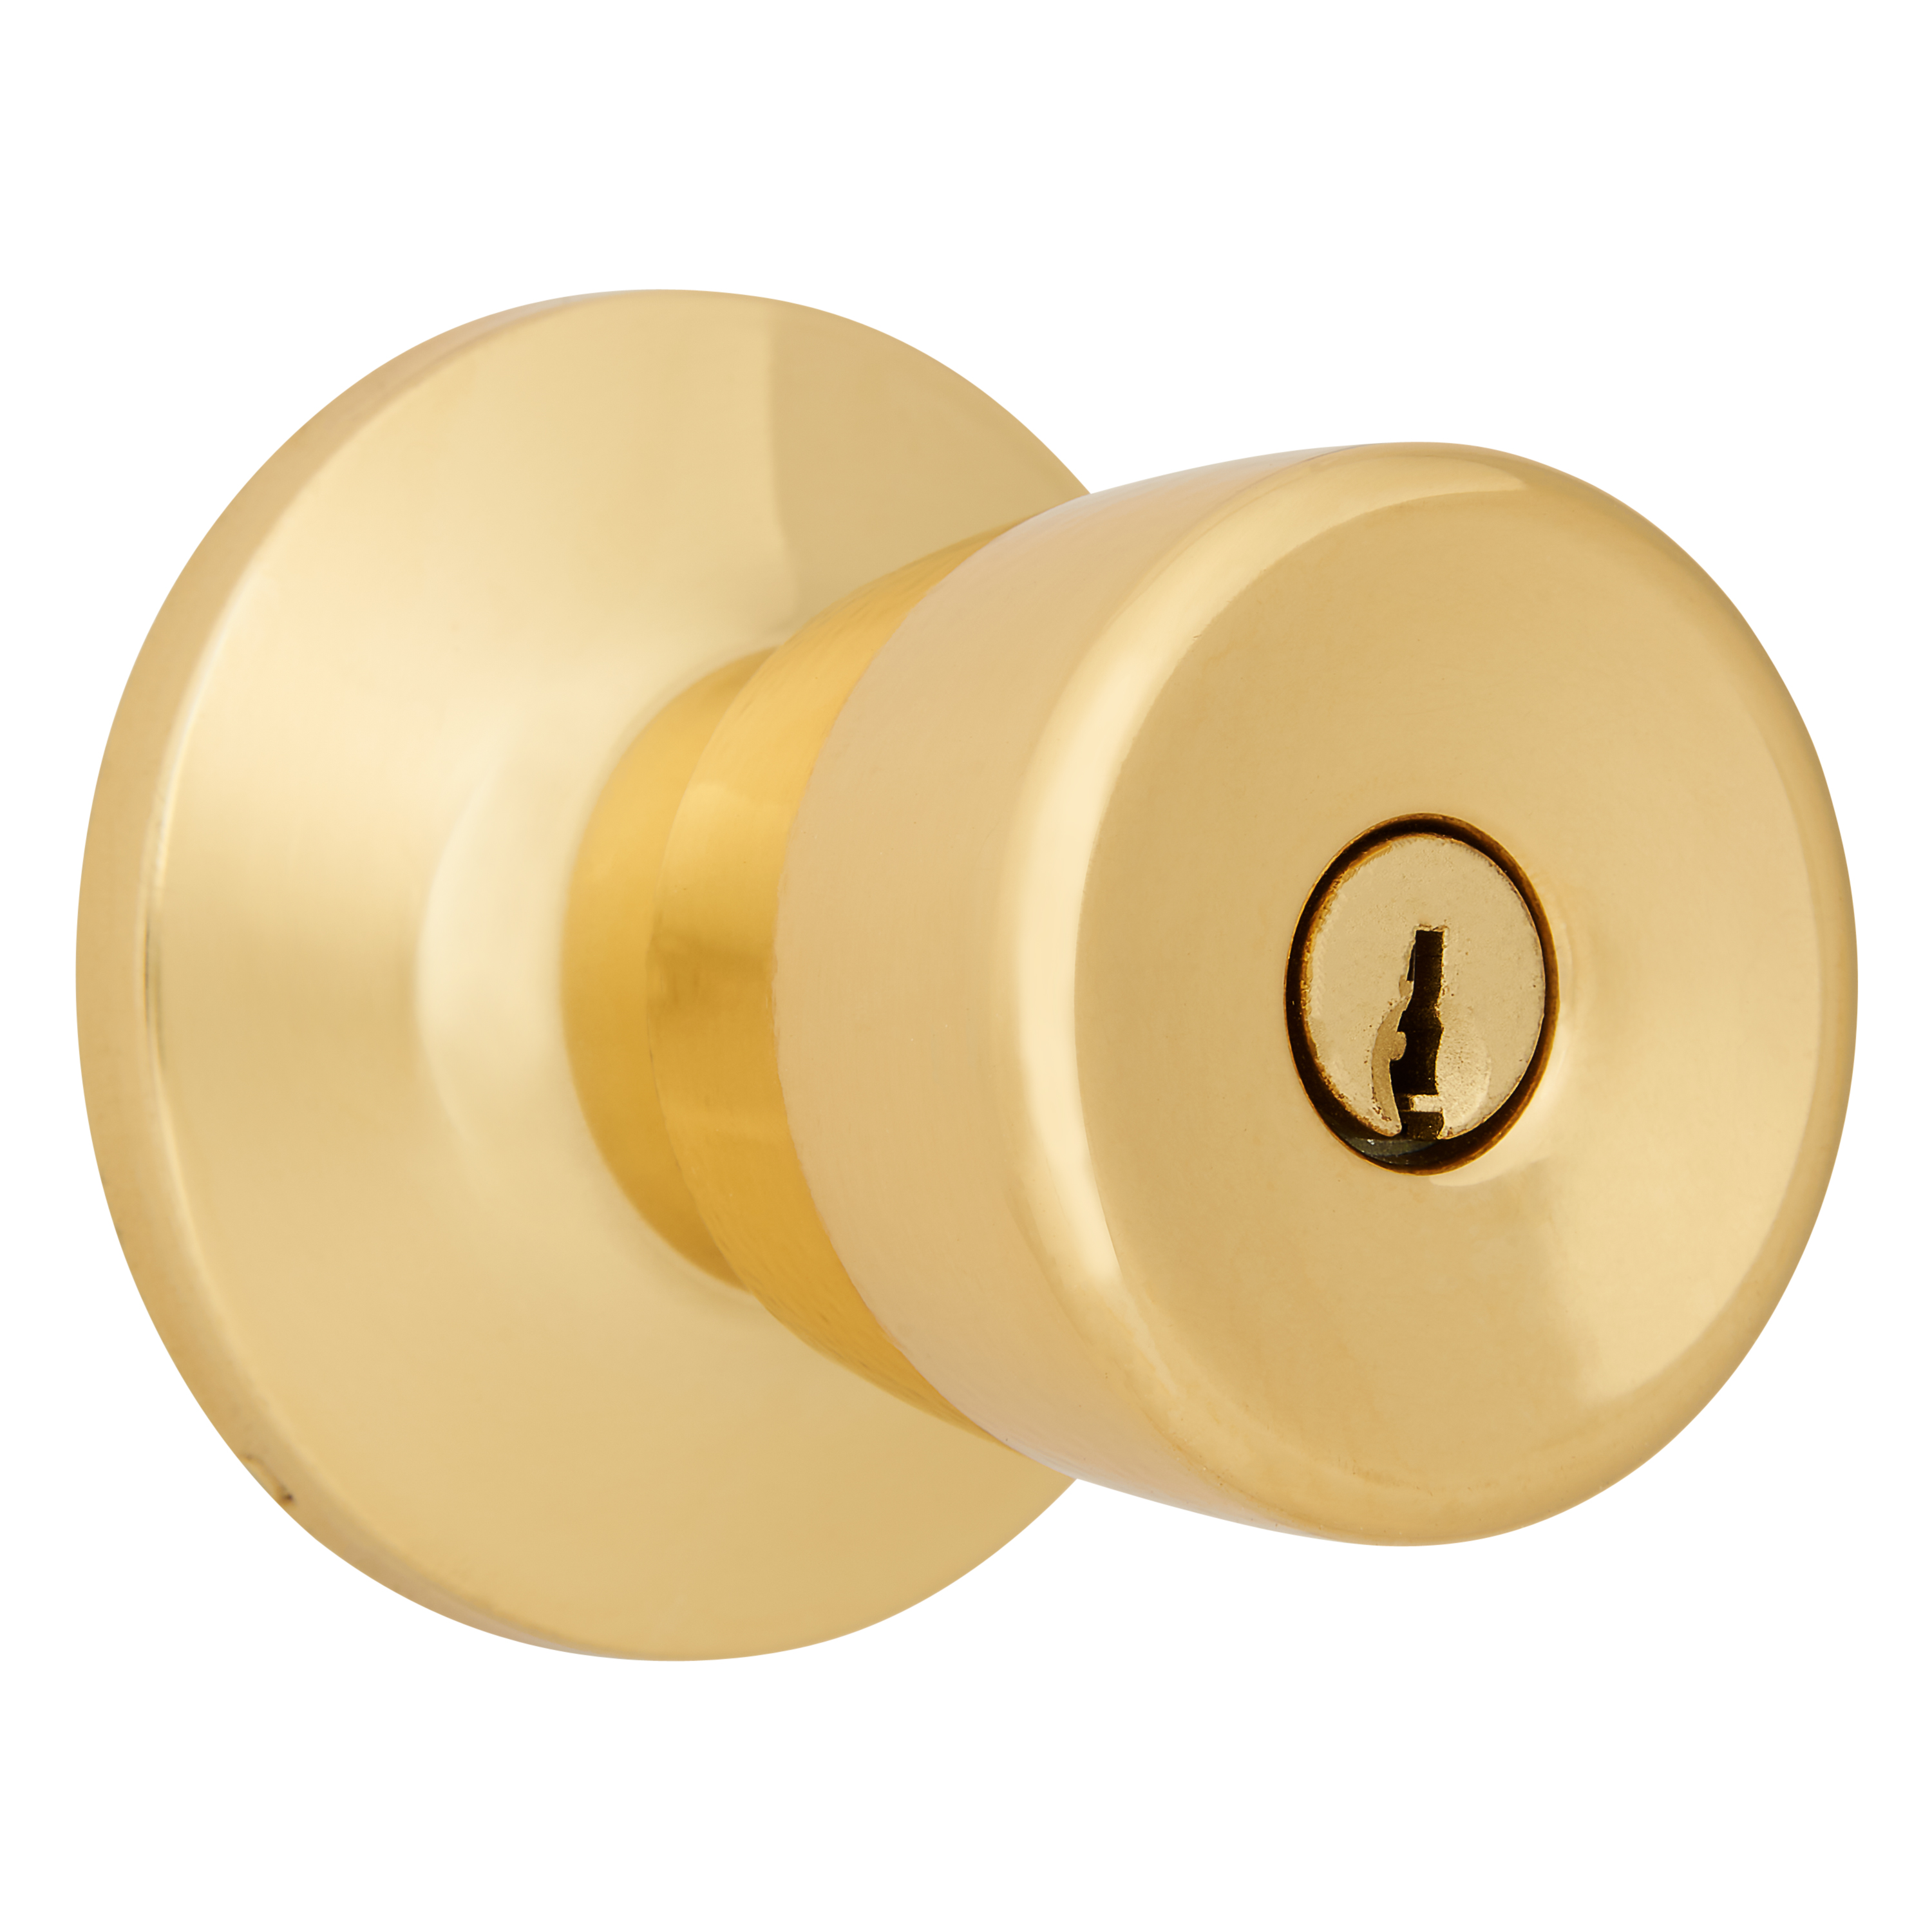 Brinks, Keyed Entry, Mobile Home Bell Style Doorknob, Polished Brass Finish - image 3 of 11